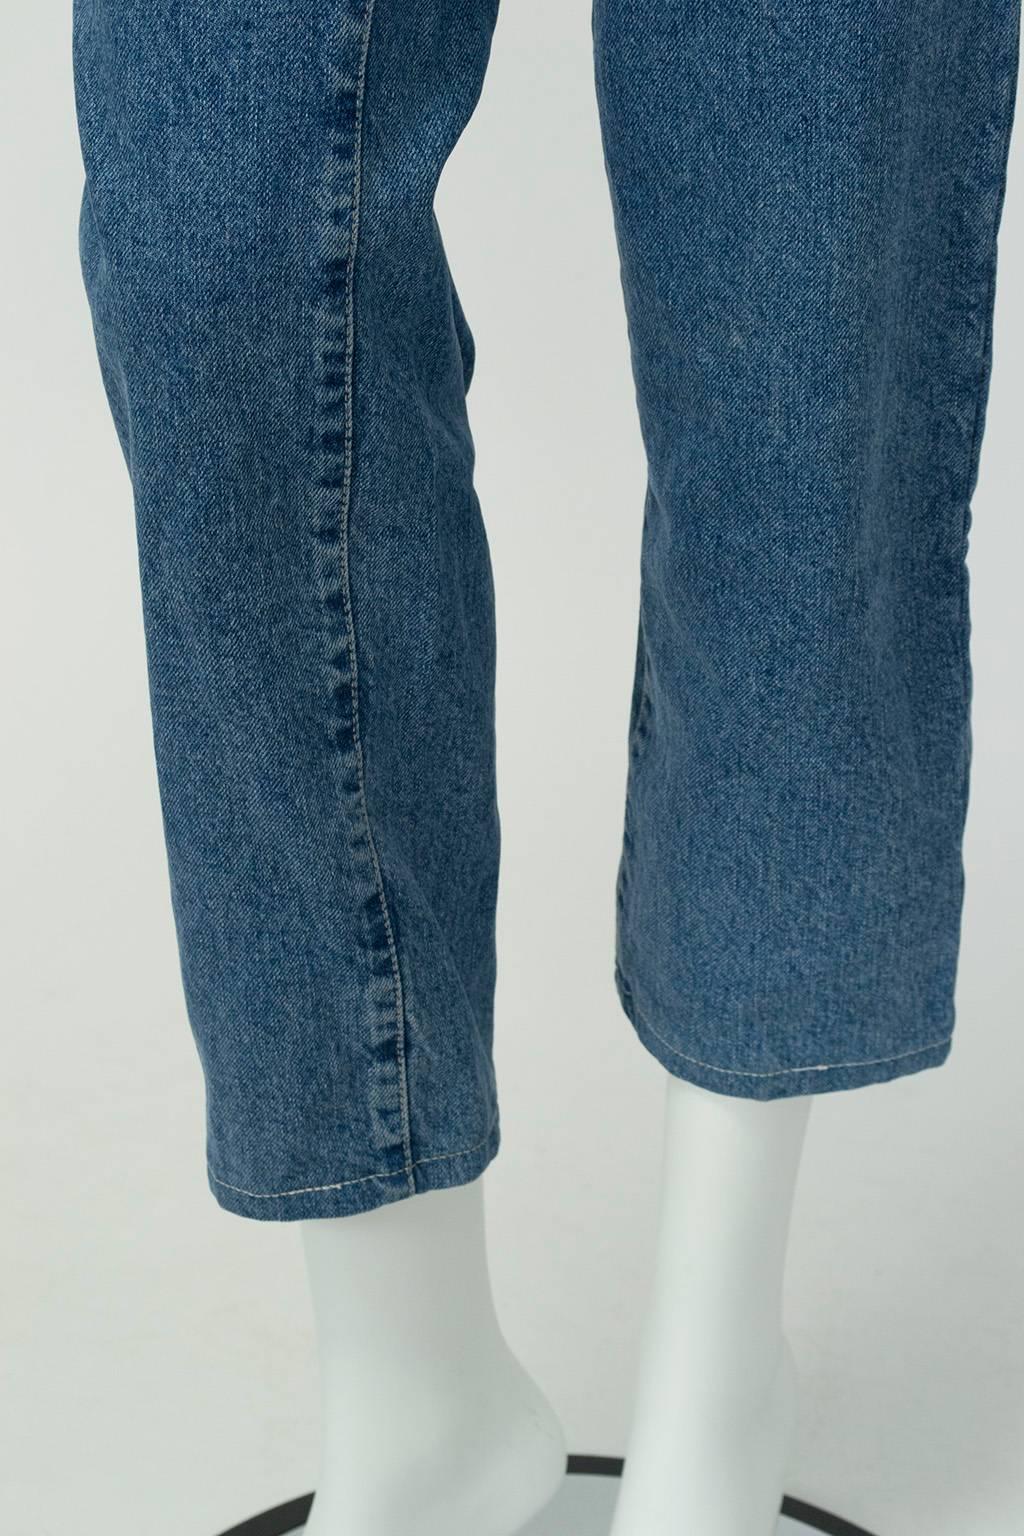 Versace Straight Leg Raw Denim Jeans with Silver Medusa Rivets - It 46, 1999 In Good Condition In Tucson, AZ